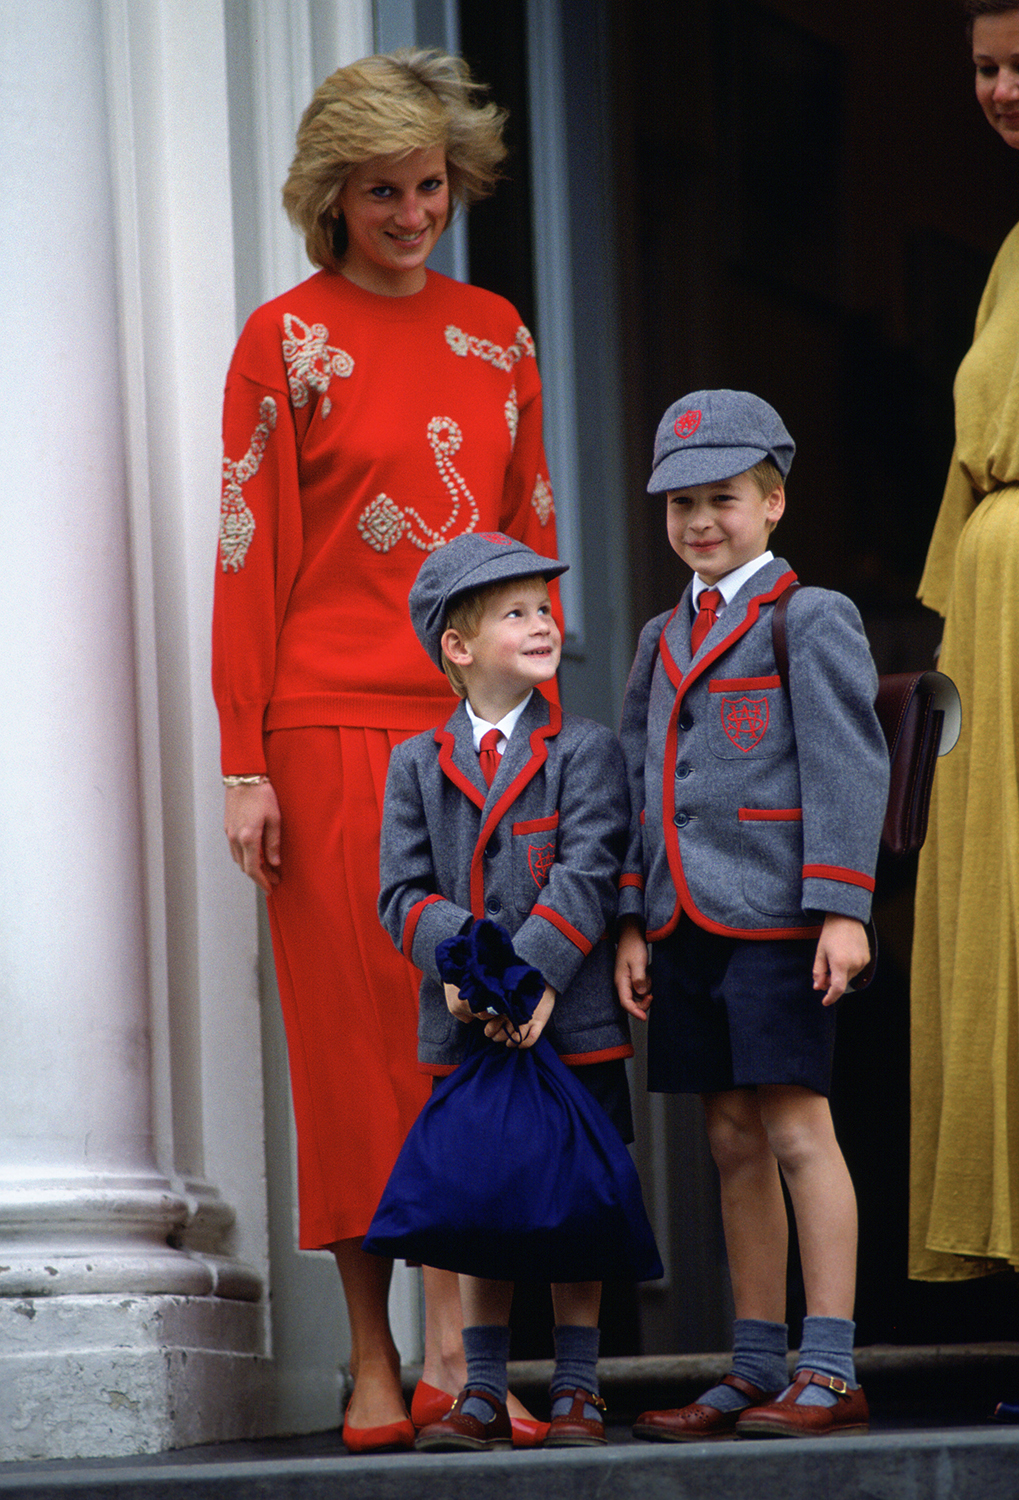 September 11th, 1987 - Princess Diana stands with her two sons, Prince William and Harry on Harry's first day of school in Notting Hill, London.